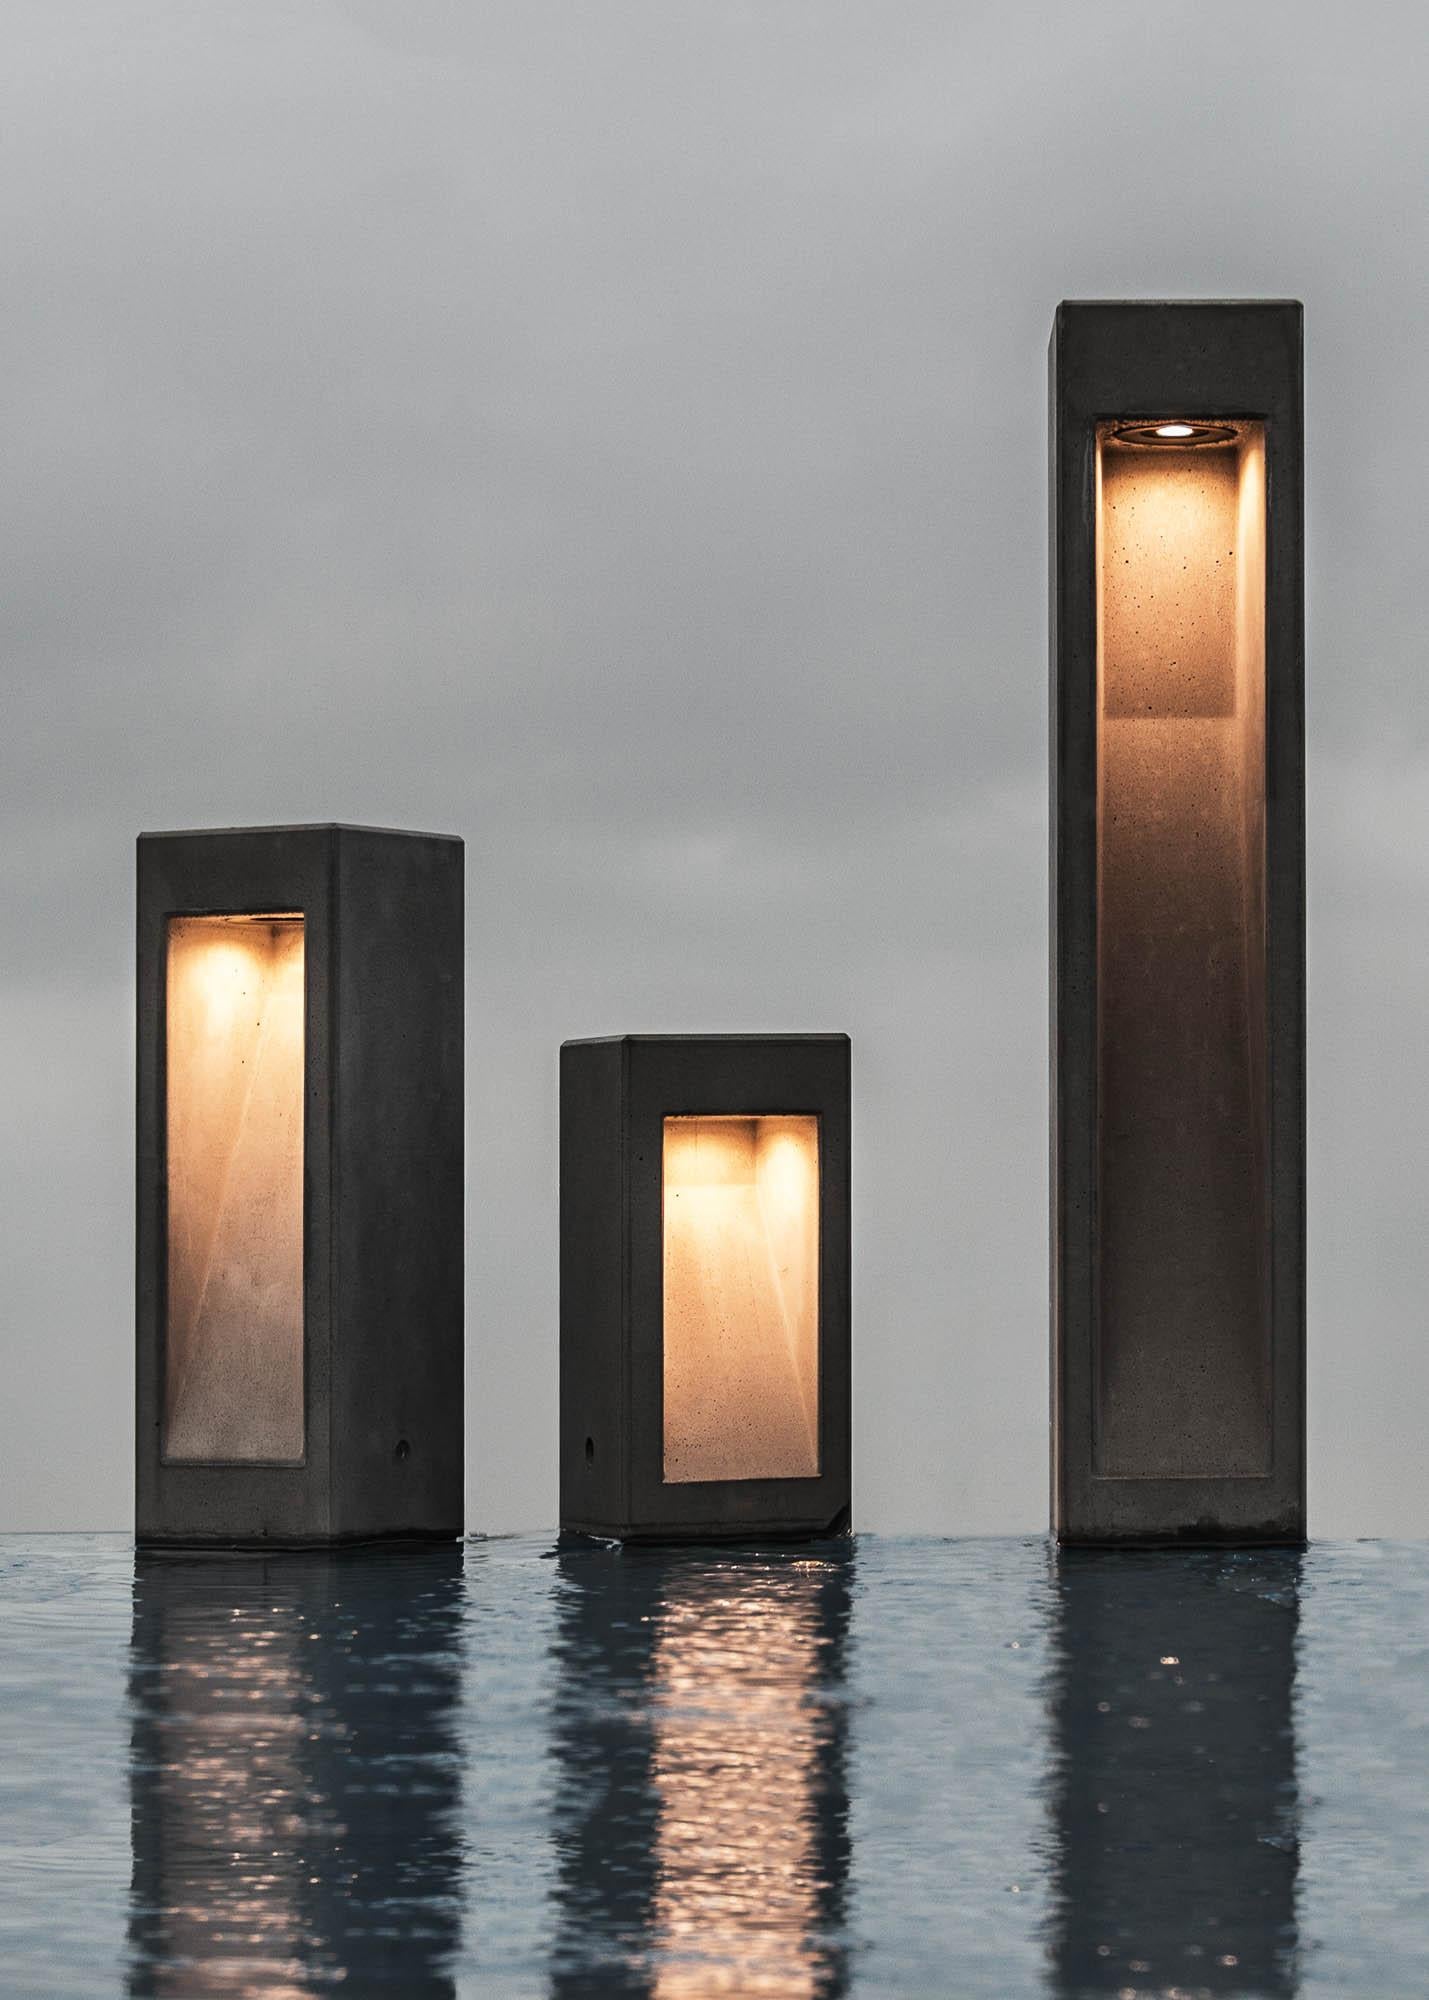 Cube L - Outdoor lighting by Bentu Design

Concrete
Measures: 120 × 120 × H 600mm
13kg
Light source: AC Led 295lm 3000K AC 110-240V 50-60Hz 3W IP67 
Cord: 1m black

Bentu Design's furniture and lightings derive its uniqueness from the